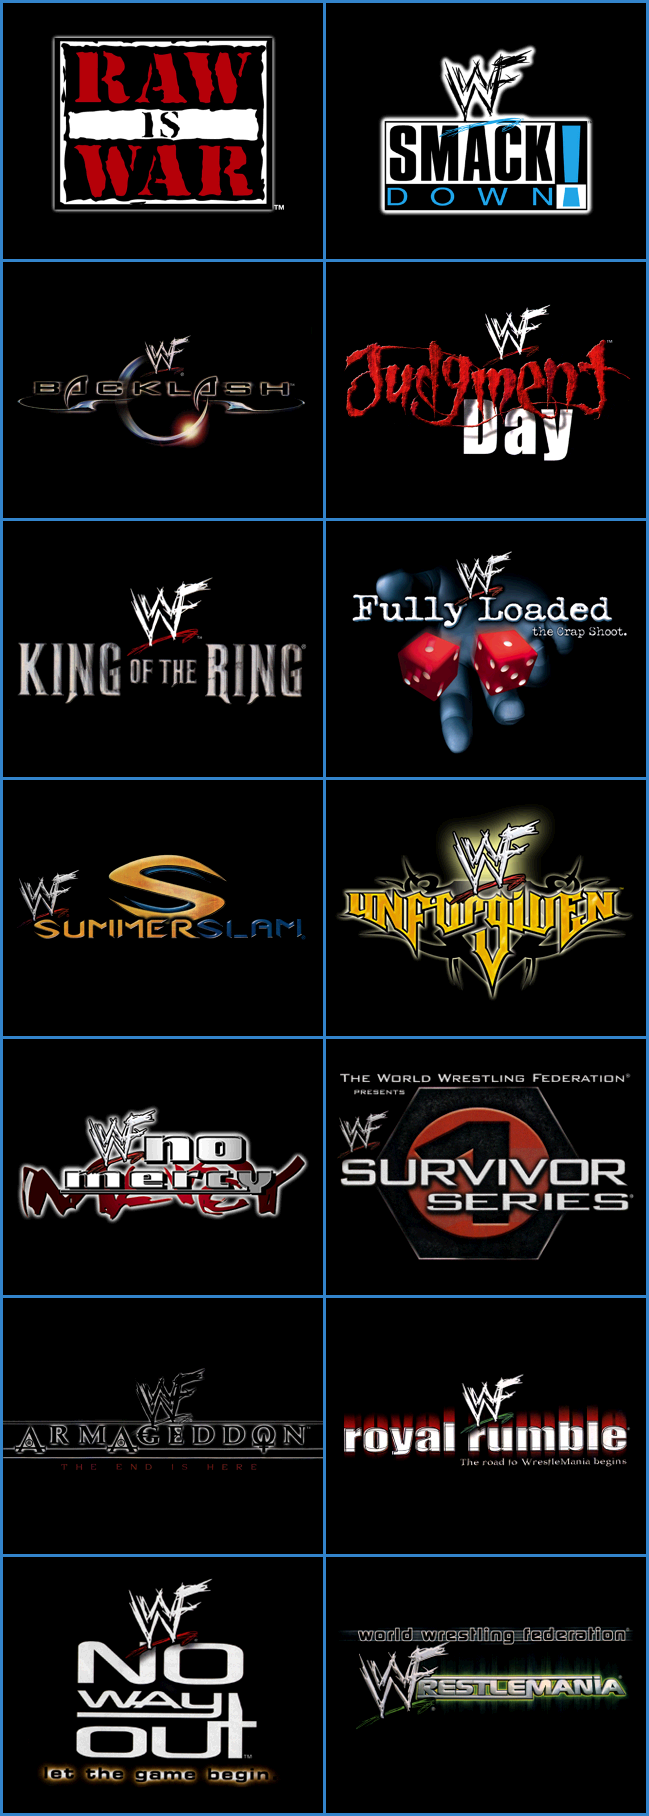 WWF SmackDown! 2: Know Your Role - Event Title Cards